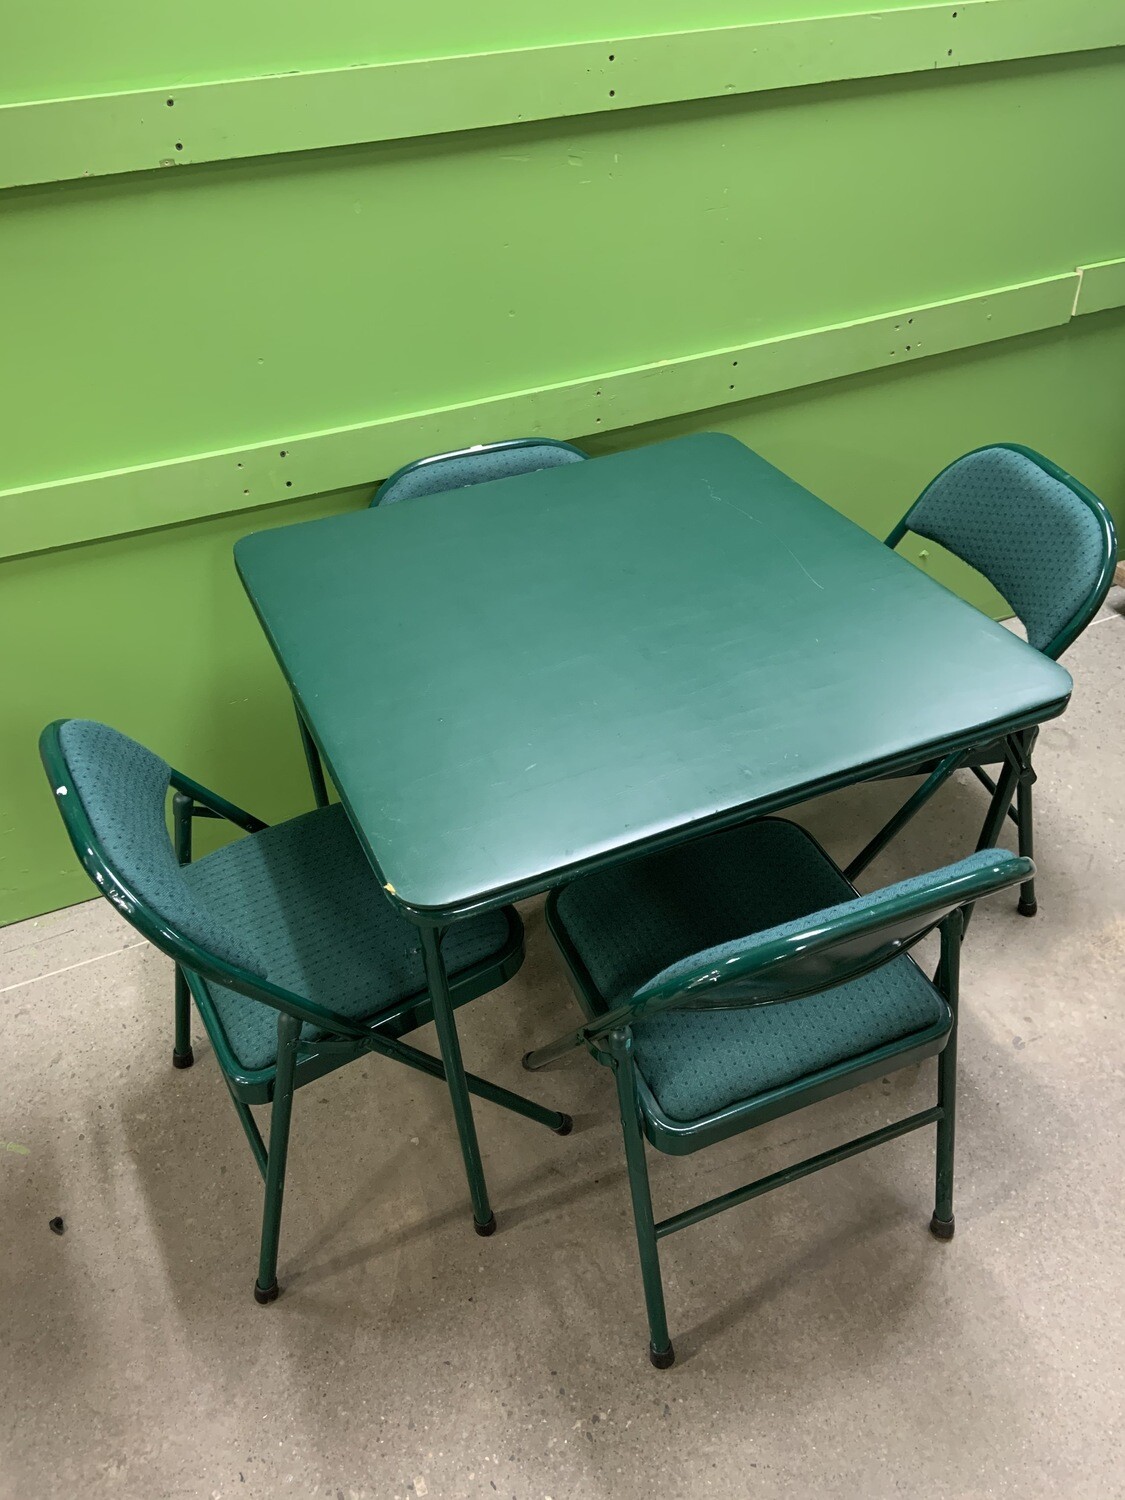 5 Piece Green Folding Game Room Card Table and Chair Set